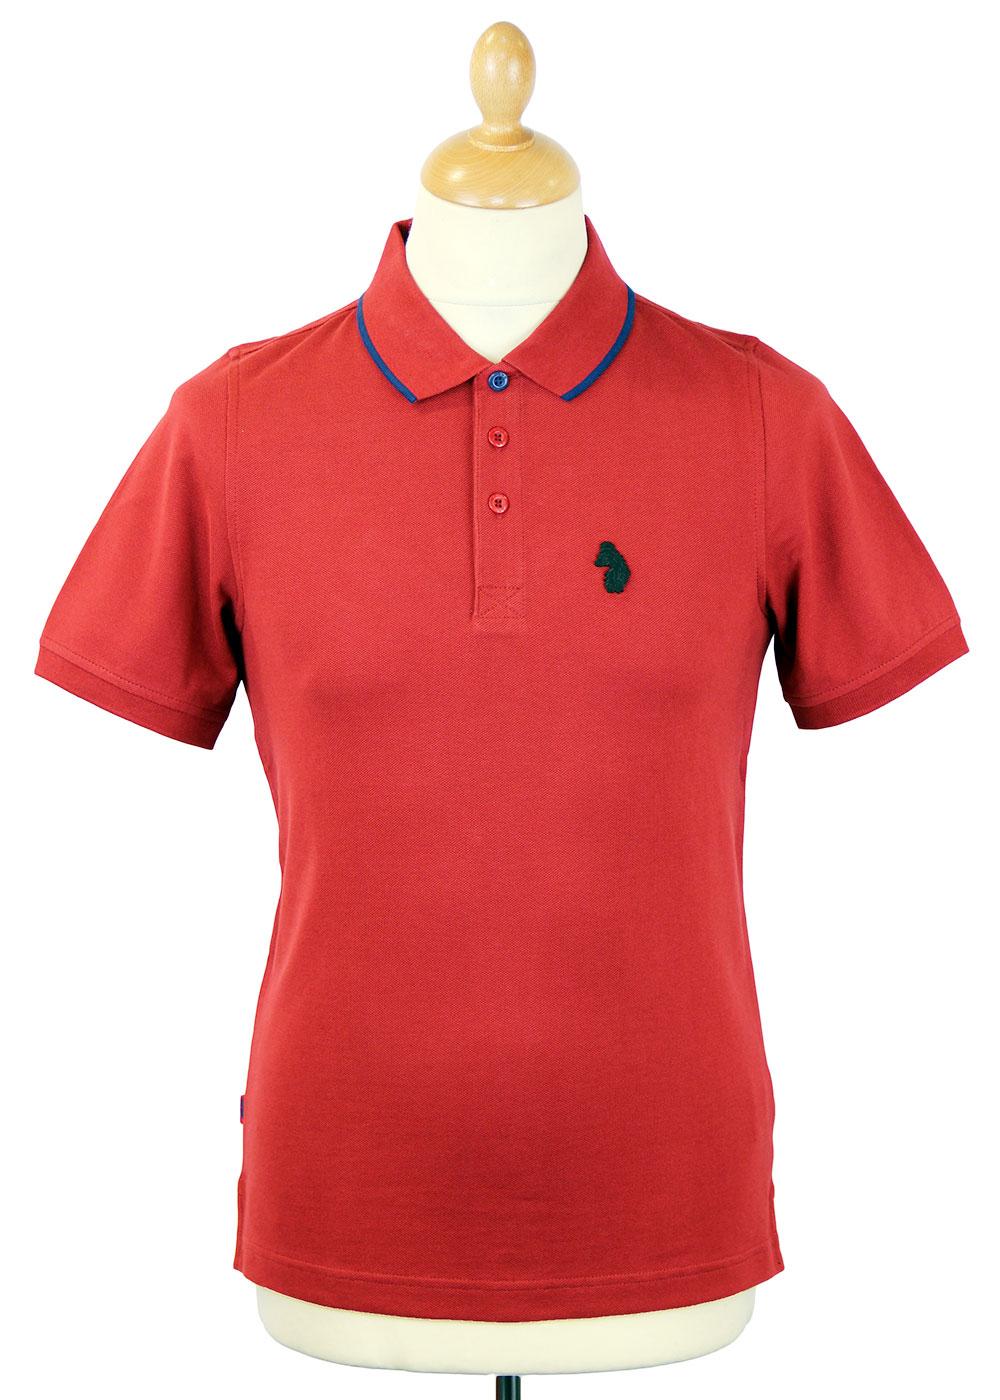 LUKE 1977 Melvin Retro Indie Mod Tipped Pique Polo Top Burnt Red